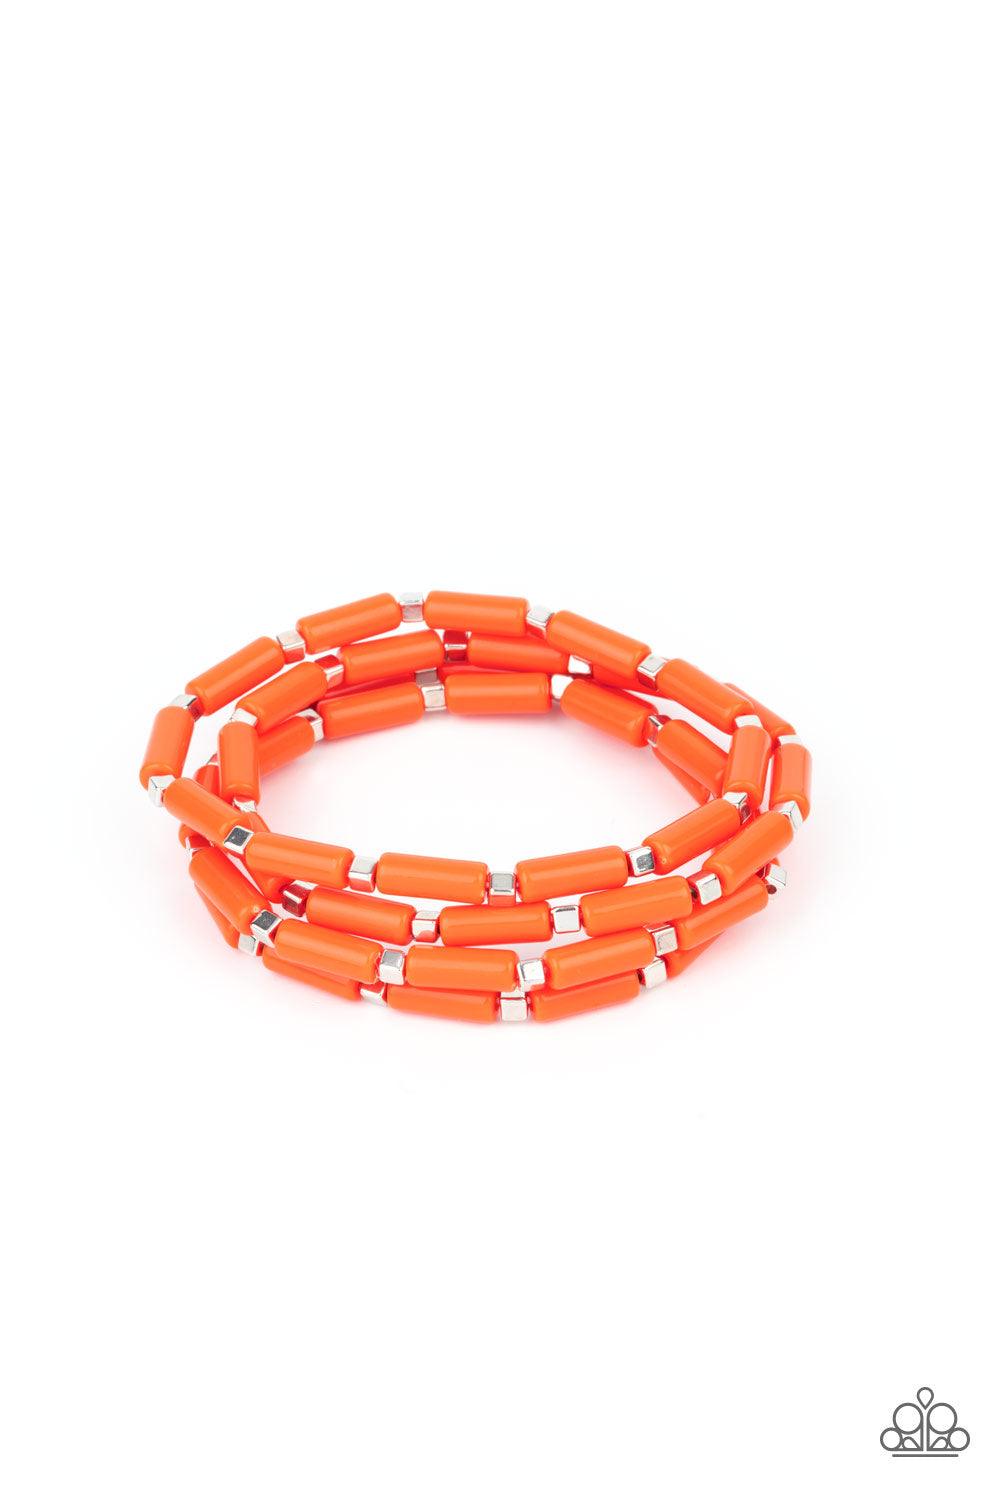 Paparazzi Accessories Radiantly Retro - Orange A playful collection of dainty silver cube beads and cylindrical orange beads are threaded along stretchy bands, creating colorful layers around the wrist. Sold as one set of four bracelets. Jewelry